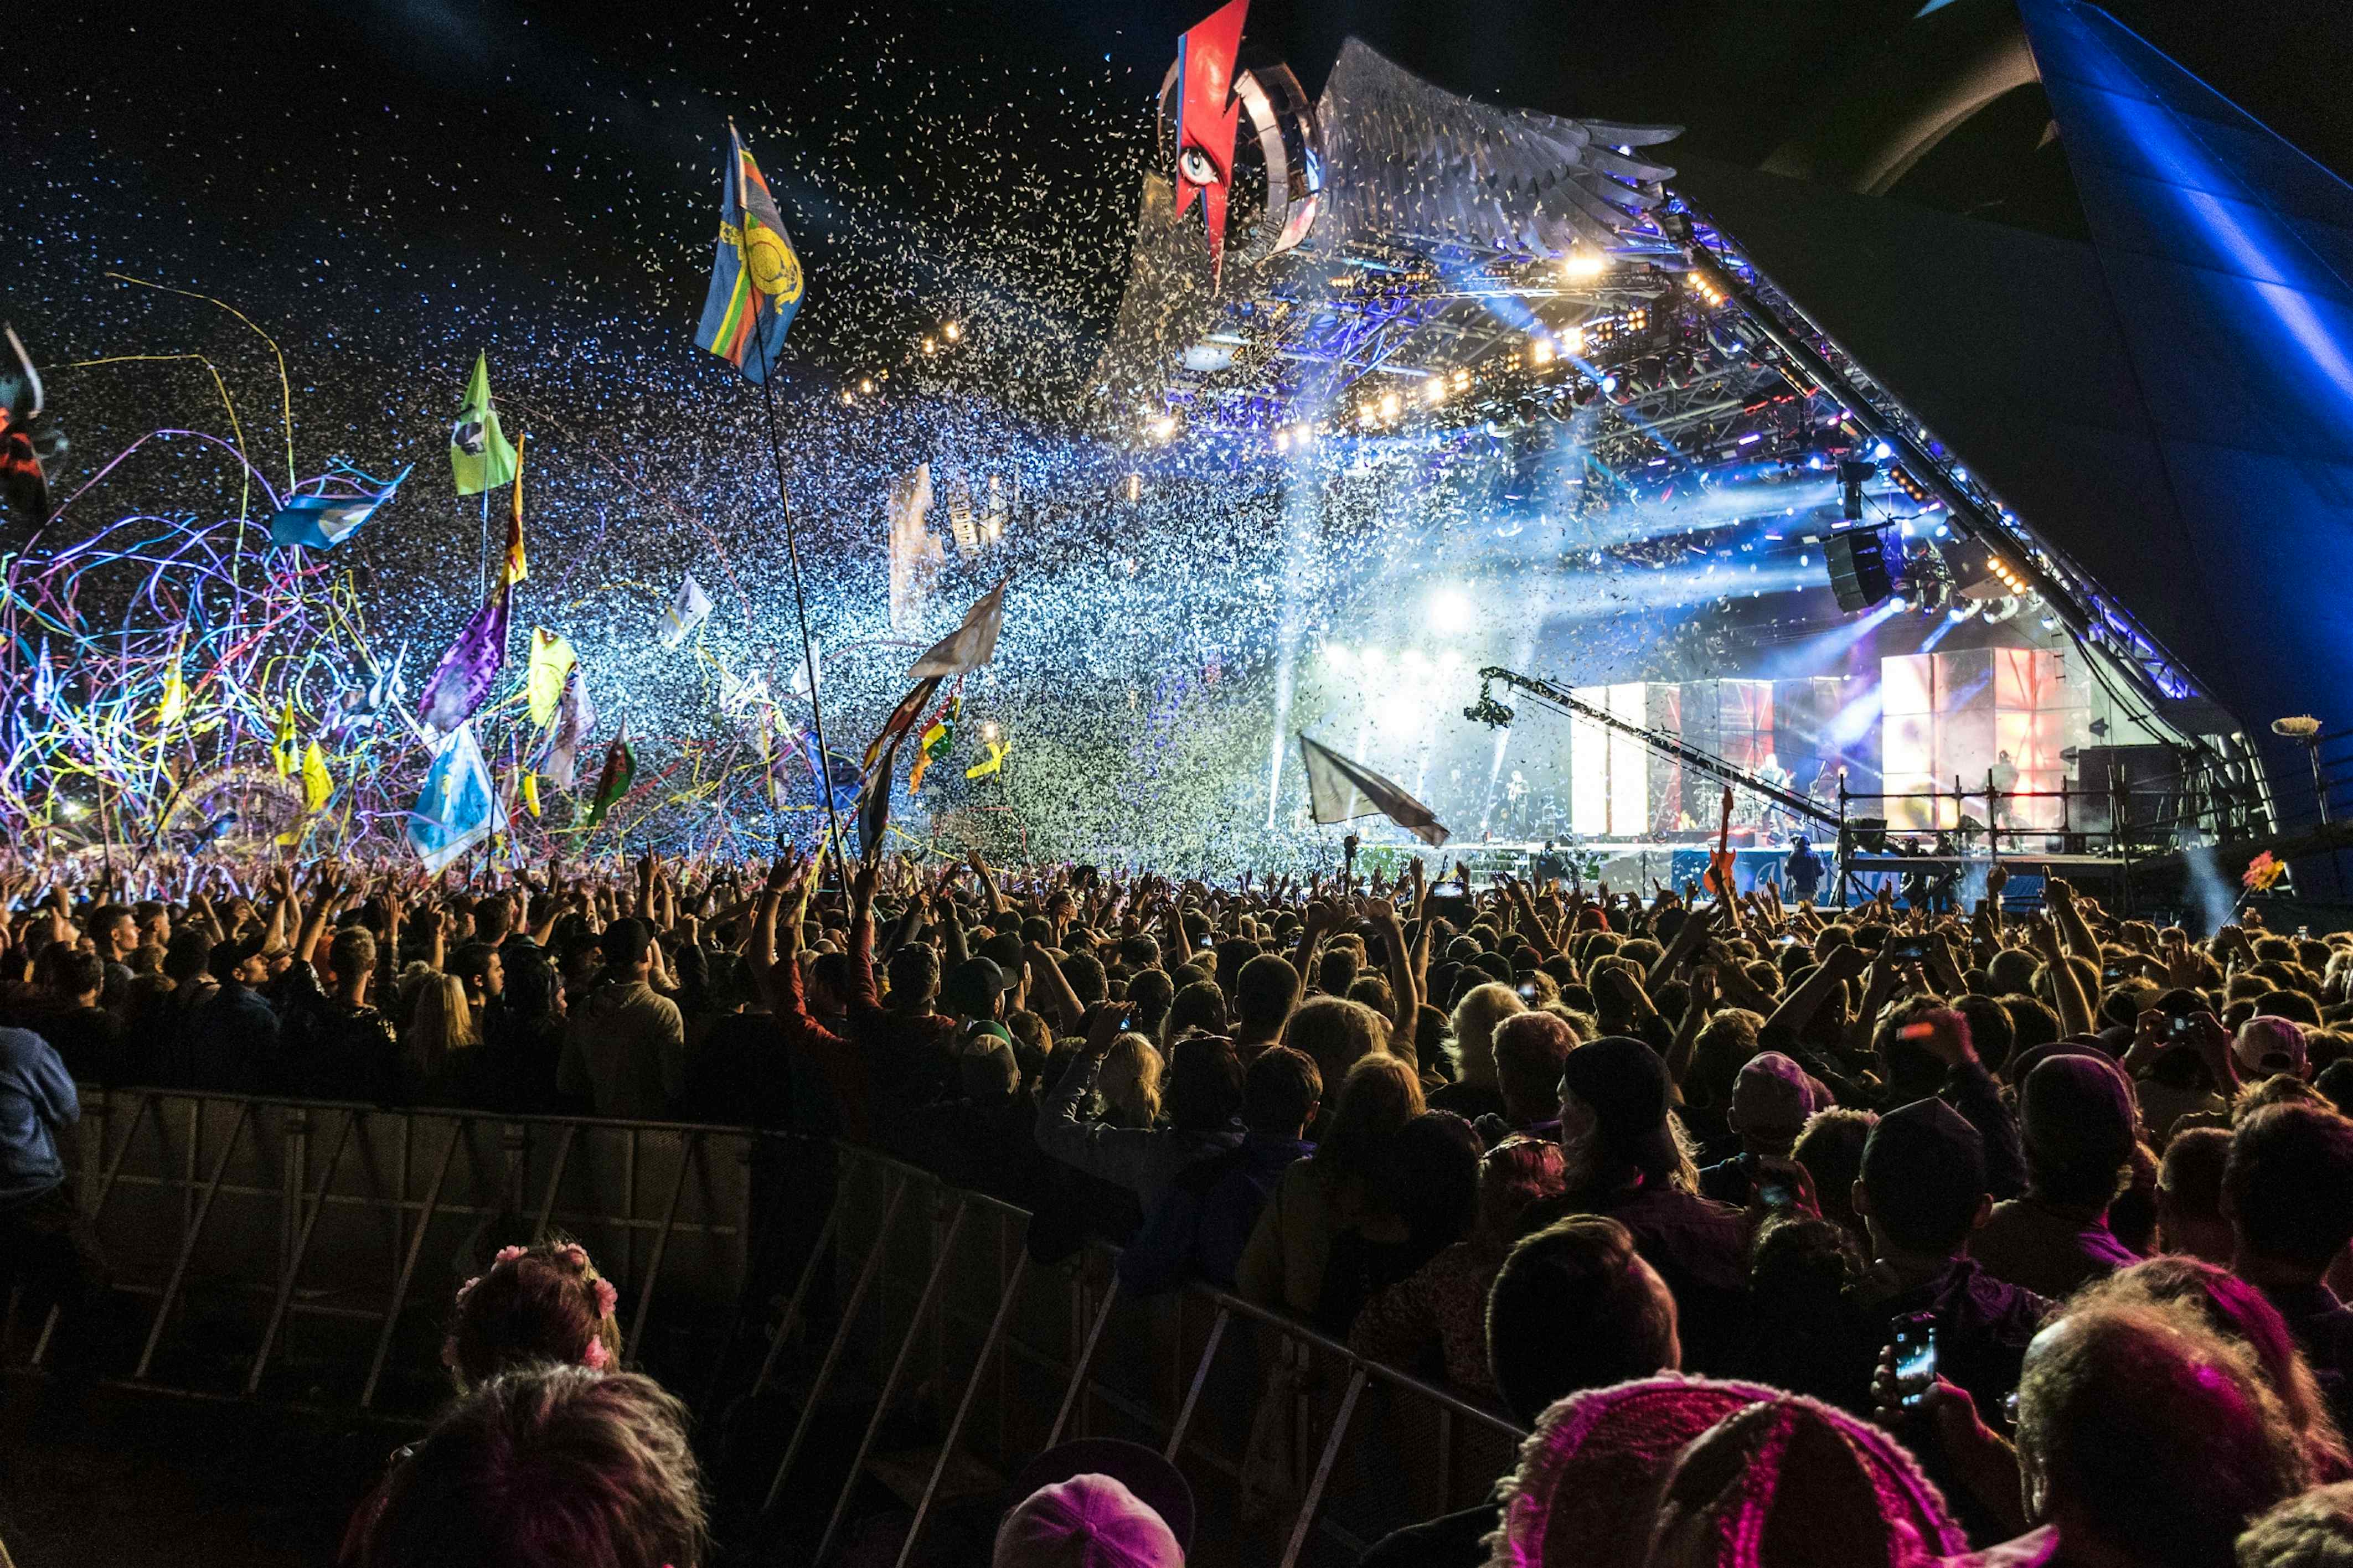 Eurovision Song Contest and Glastonbury 2020 cancelled due to COVID19